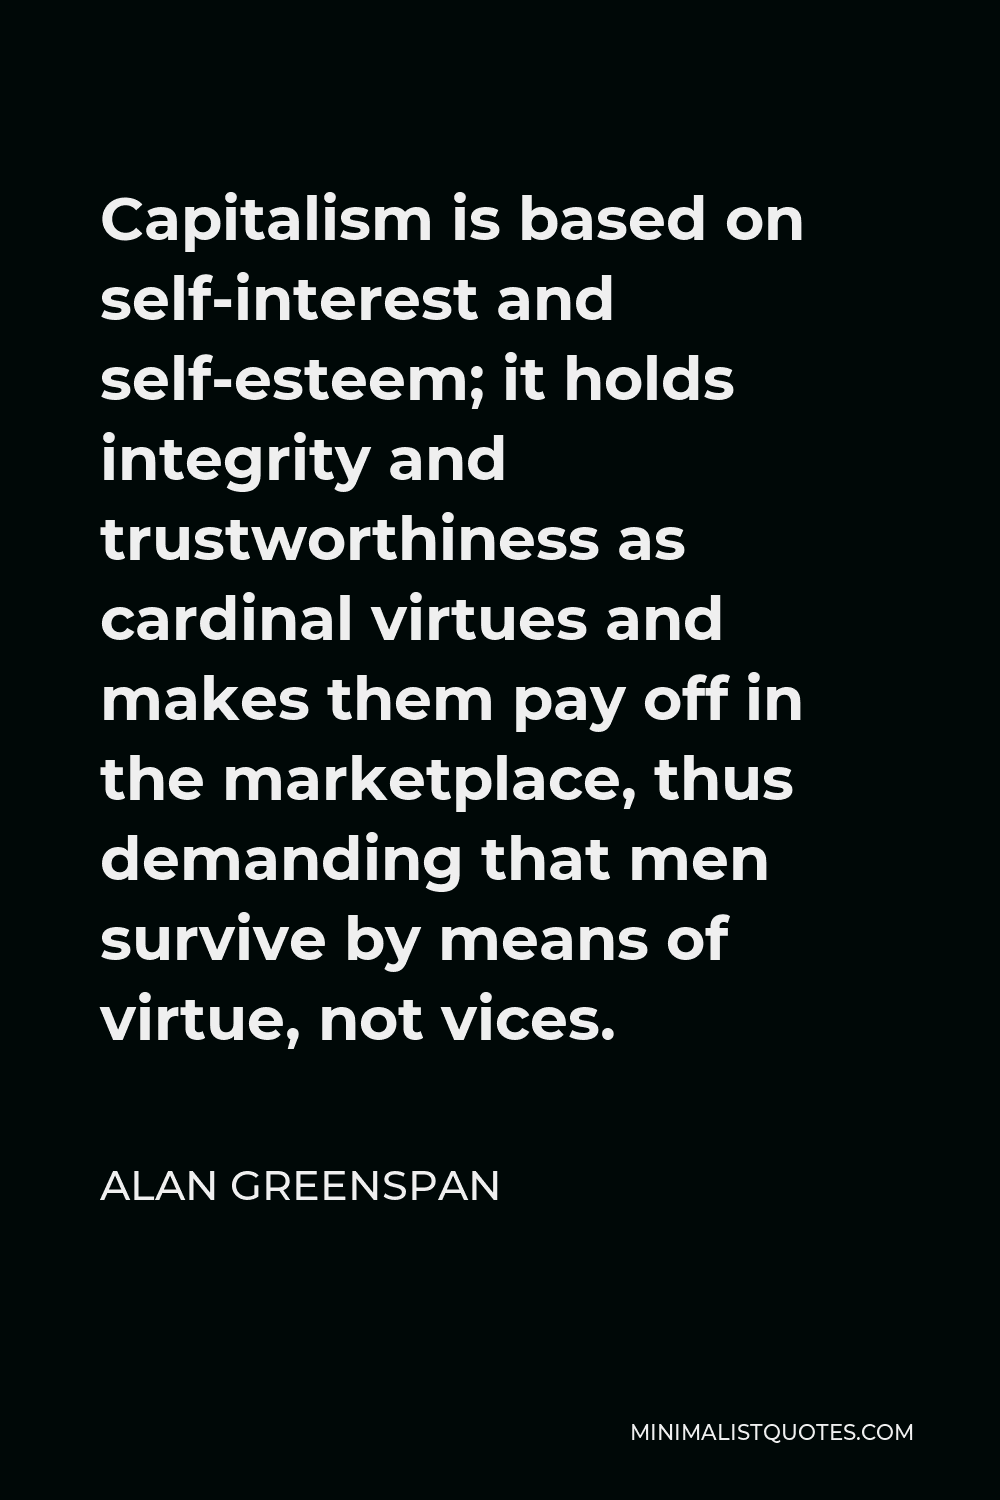 Alan Greenspan Quote - Capitalism is based on self-interest and self-esteem; it holds integrity and trustworthiness as cardinal virtues and makes them pay off in the marketplace, thus demanding that men survive by means of virtue, not vices.